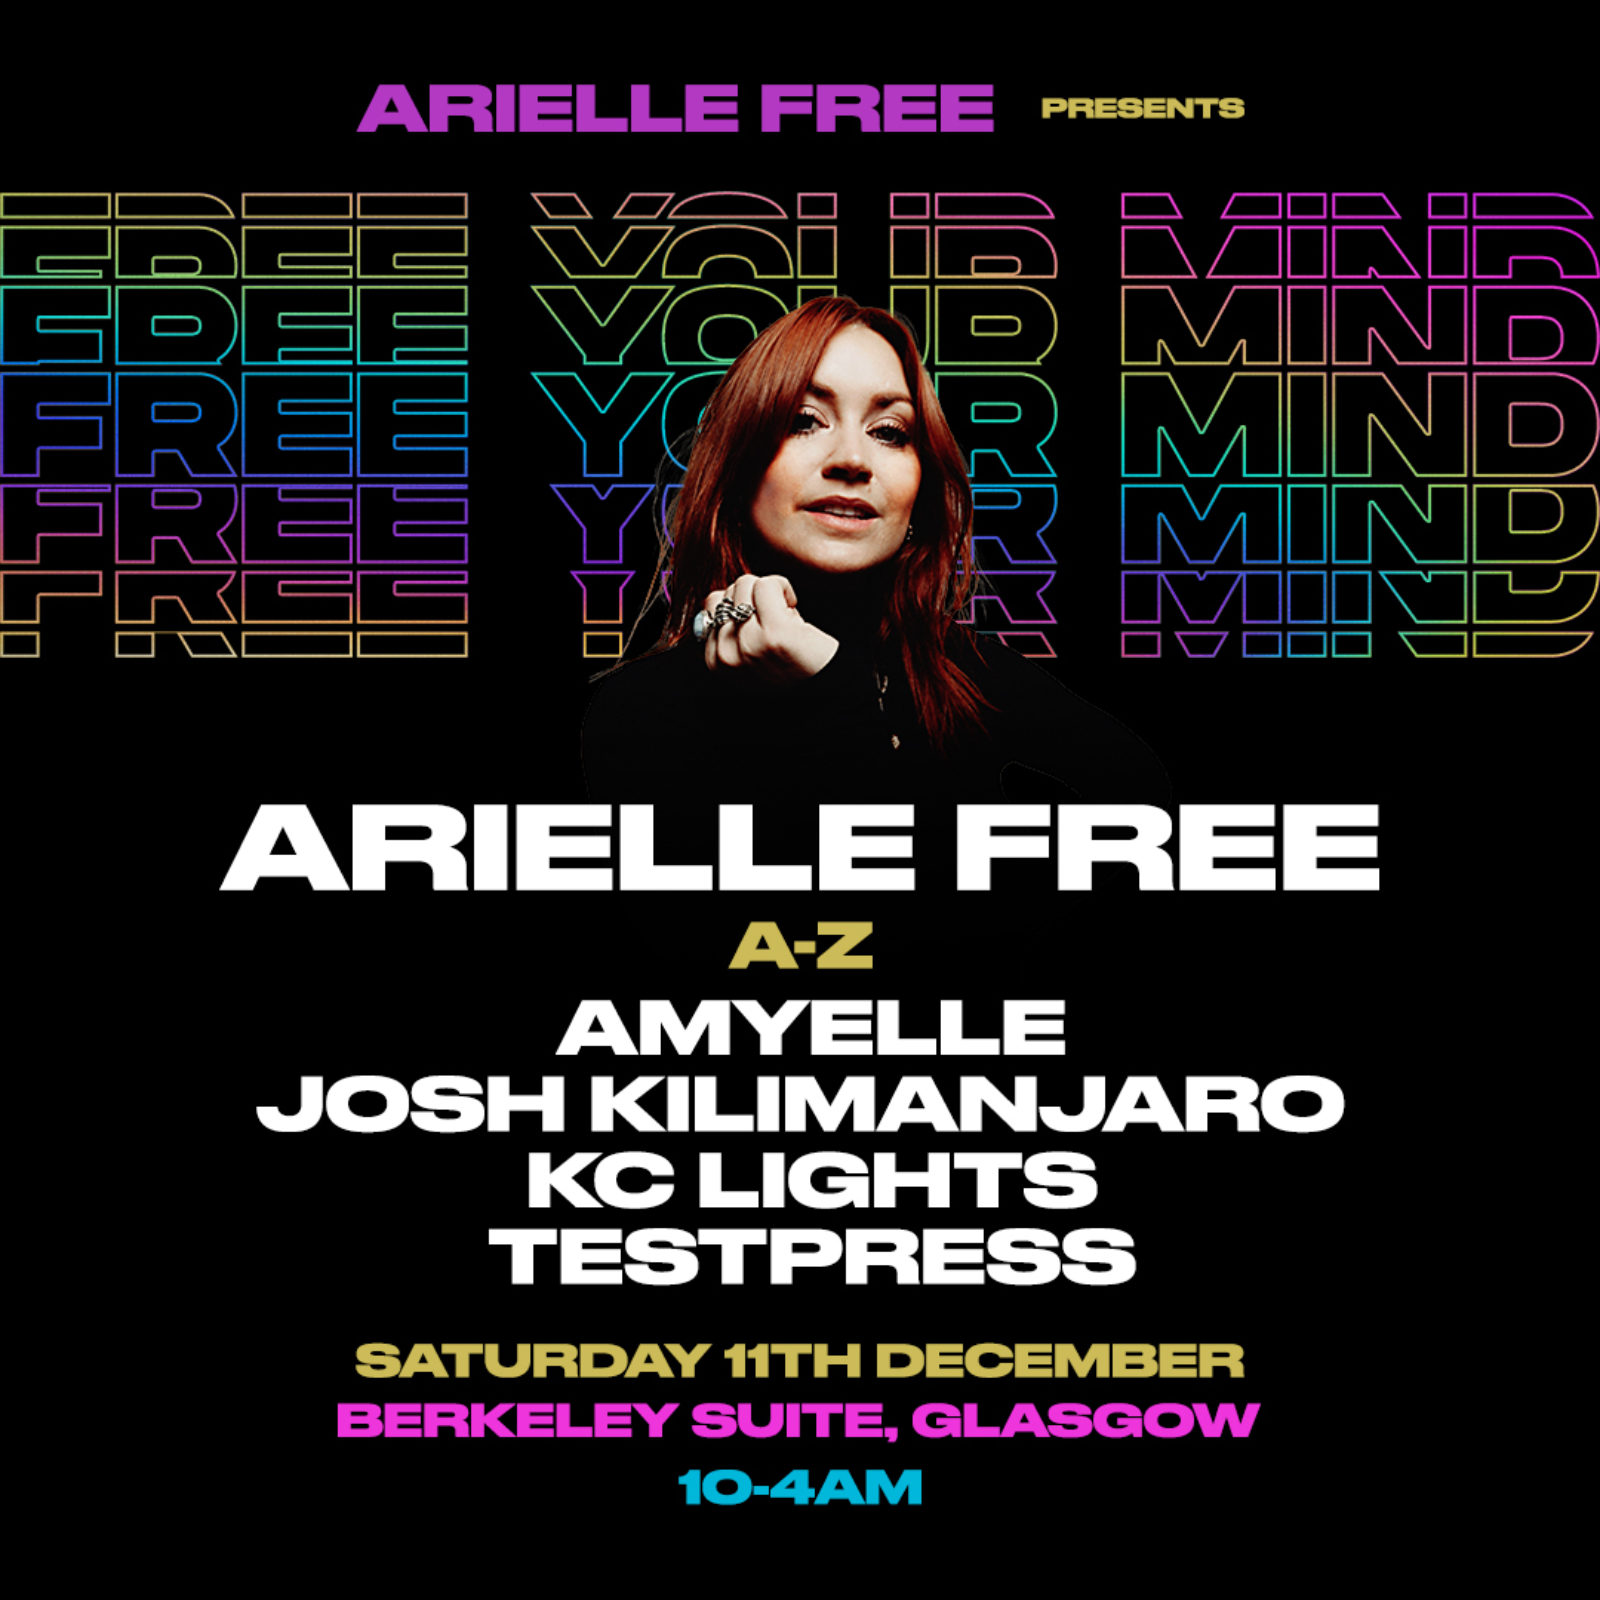 FREE YOUR MIND - Arielle Free